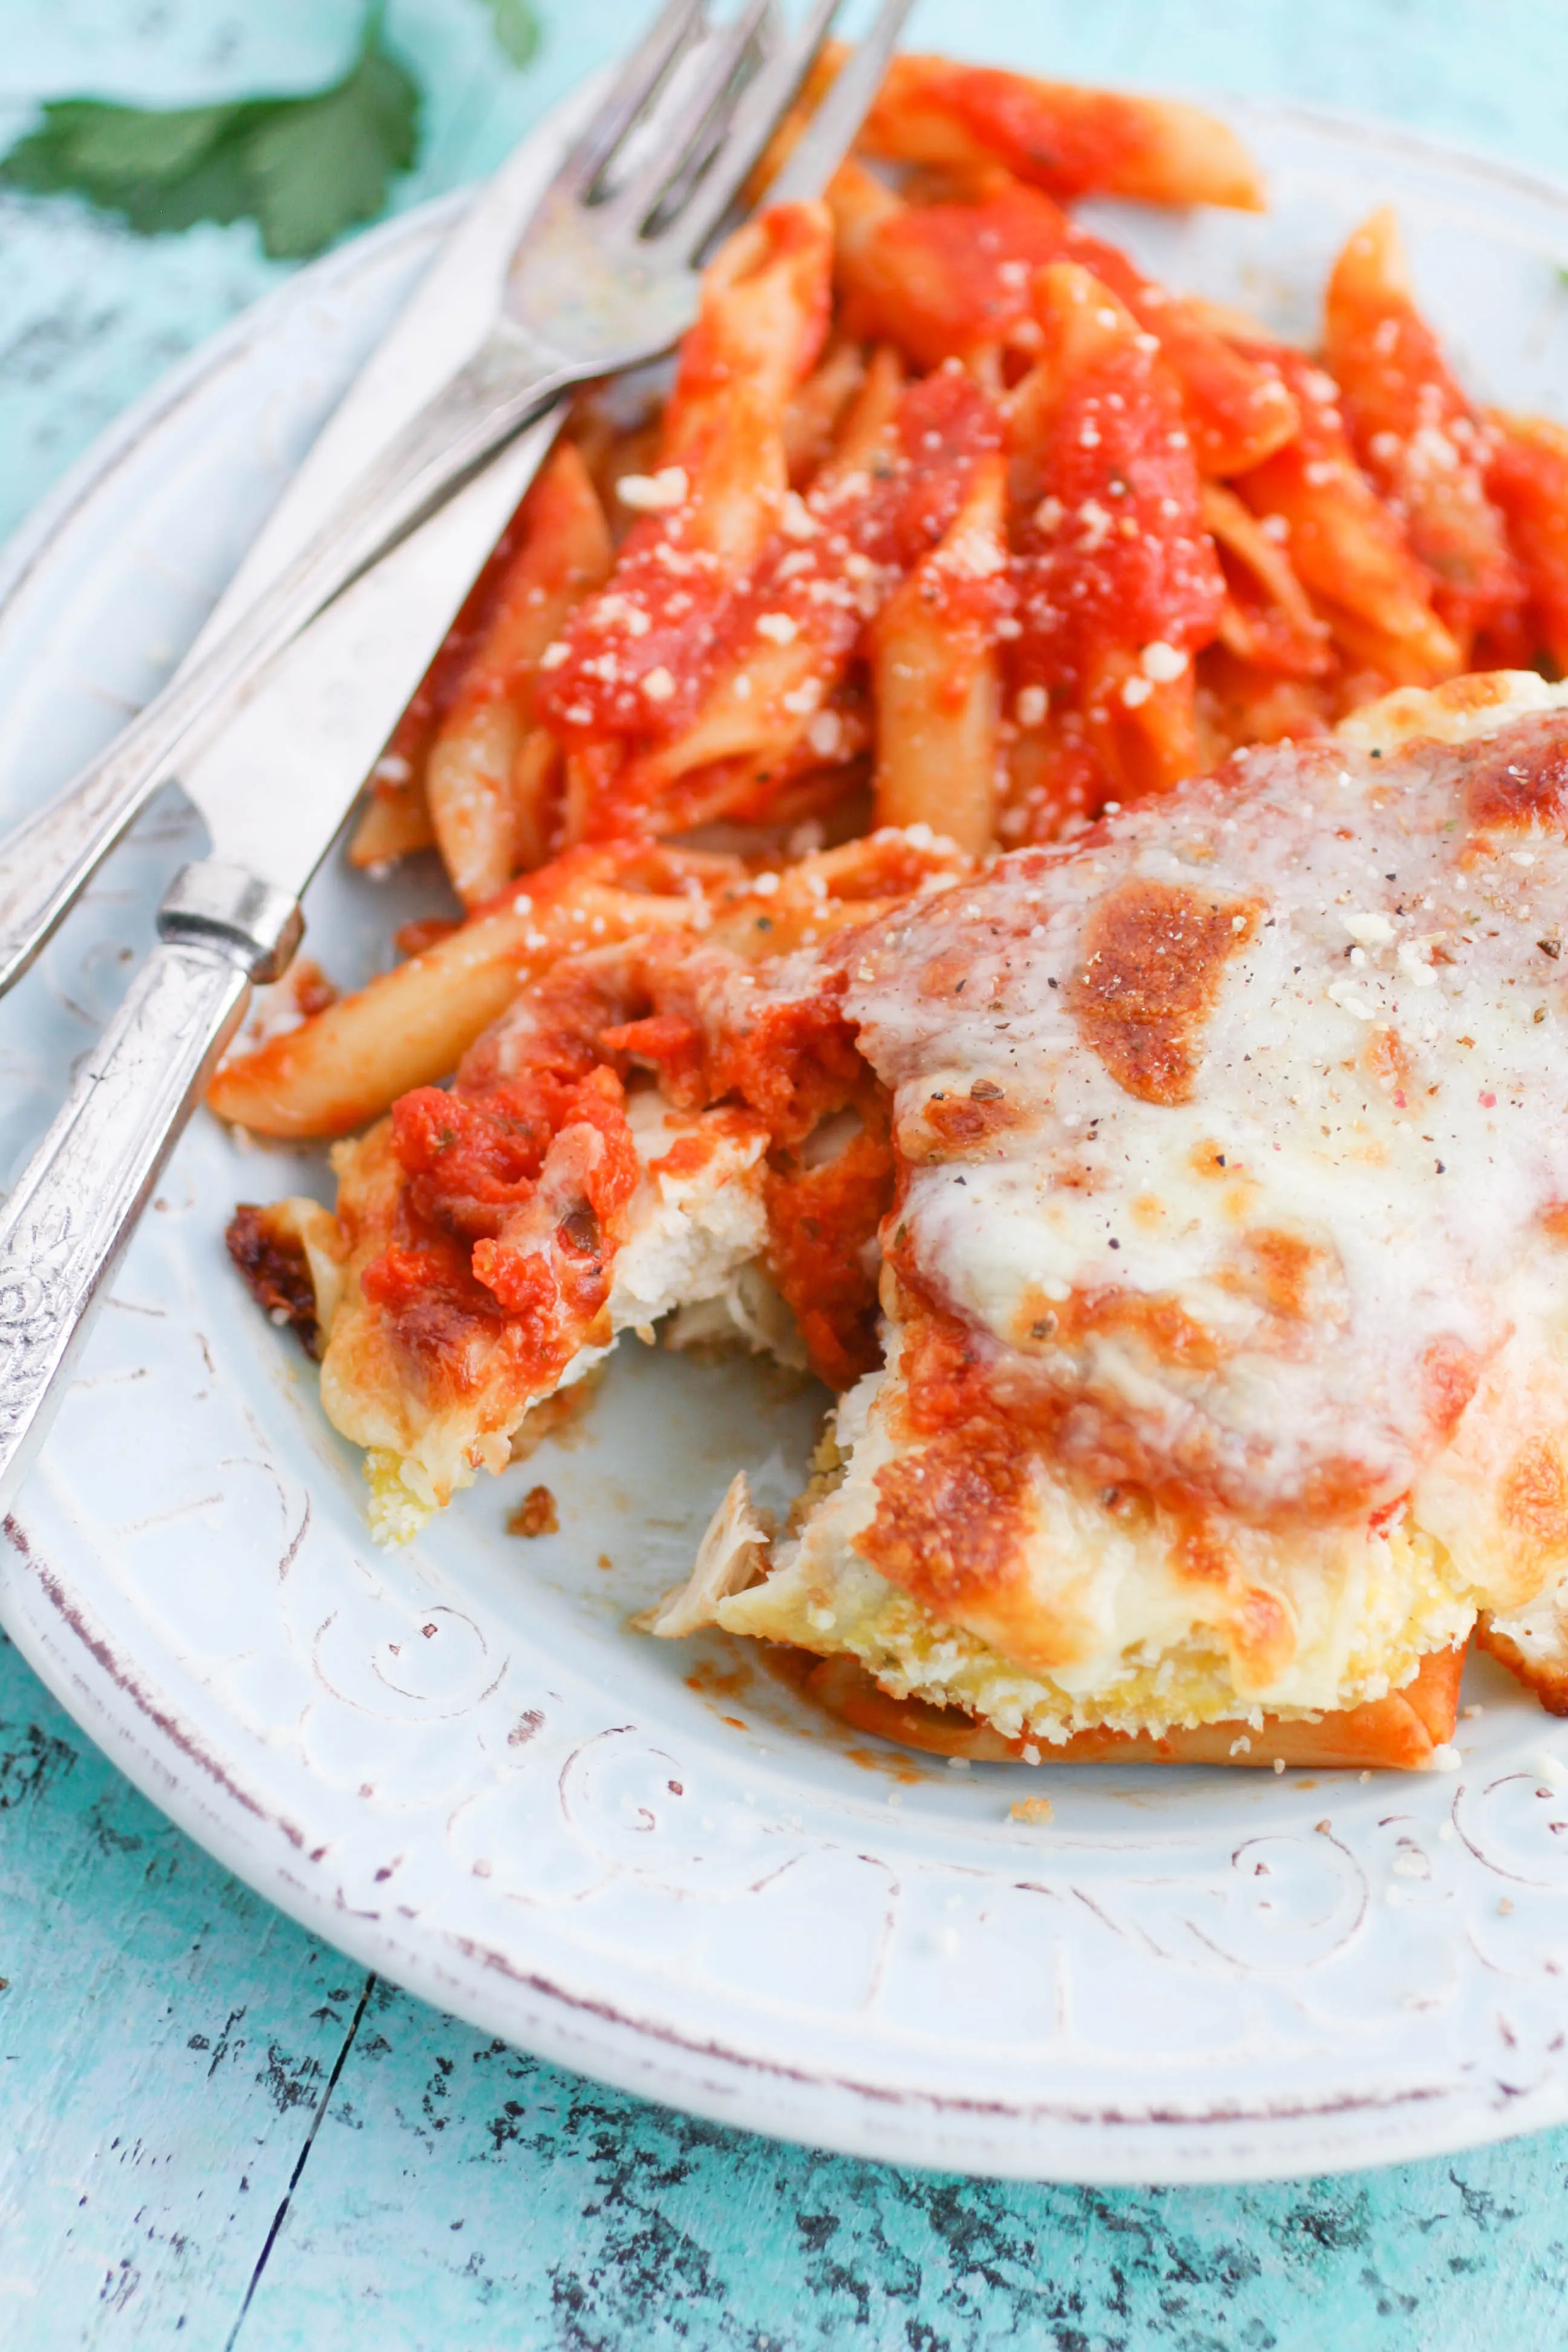 Classic Baked Chicken Parmesan is a great dish to serve along with your favorite pasta! Classic Baked Chicken Parmesan makes a great meal.